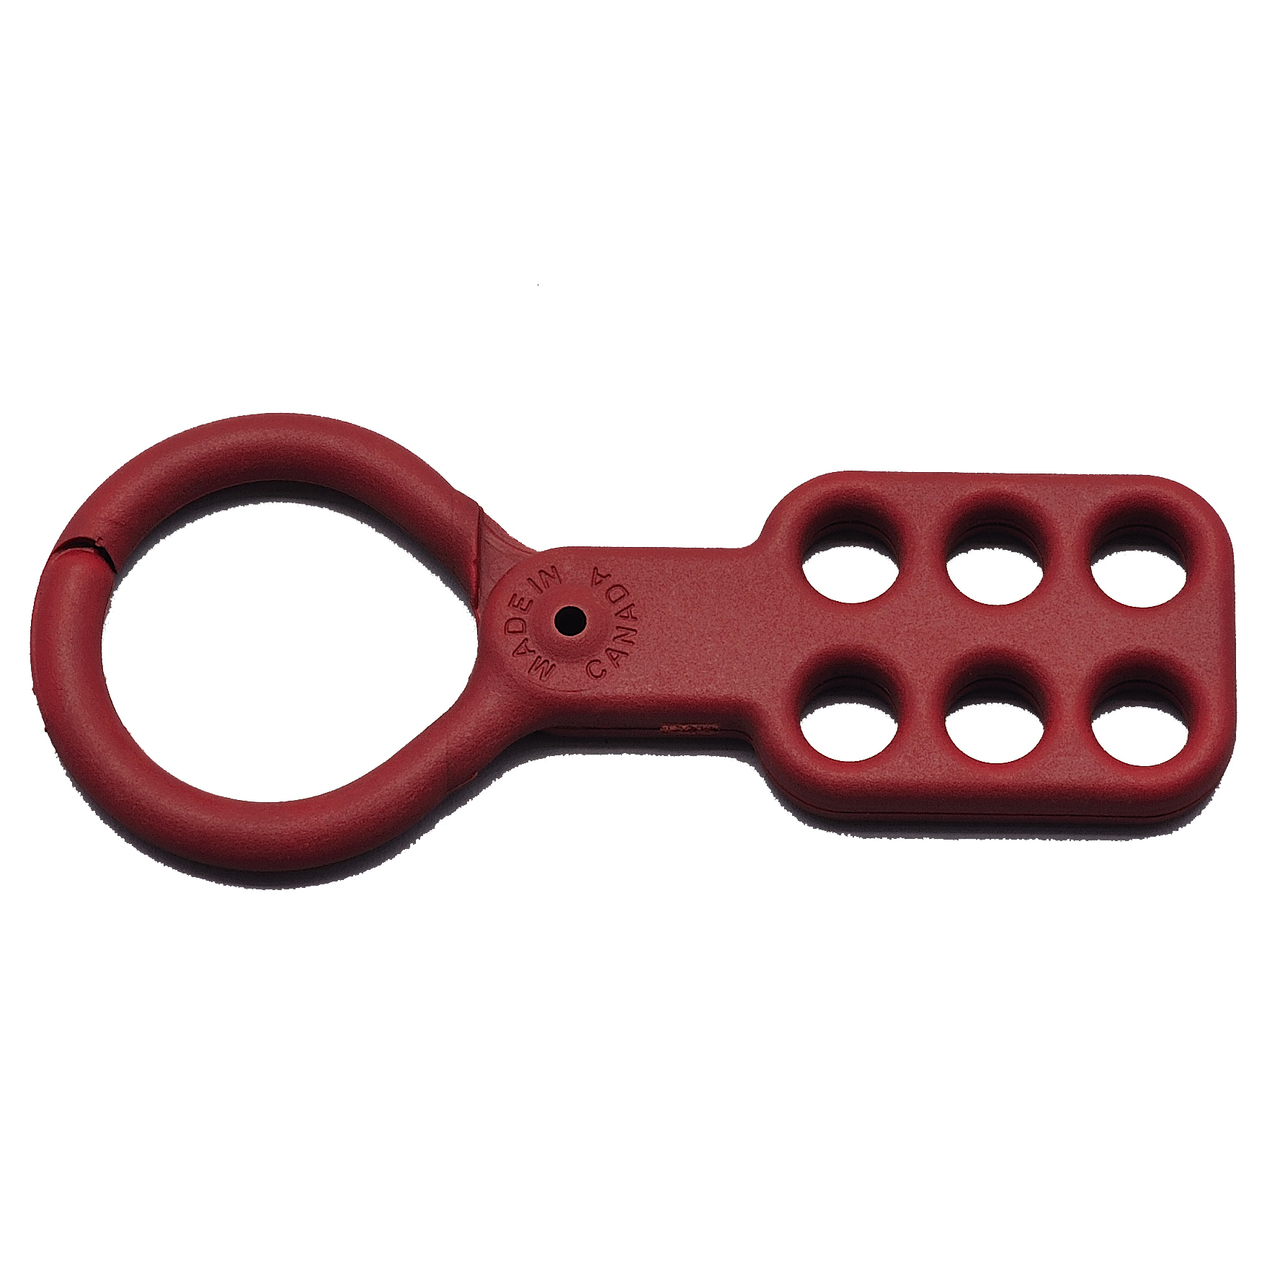 ZING RecycLockout Lockout Tagout Hasp 1.5 Inch, Recycled Plastic